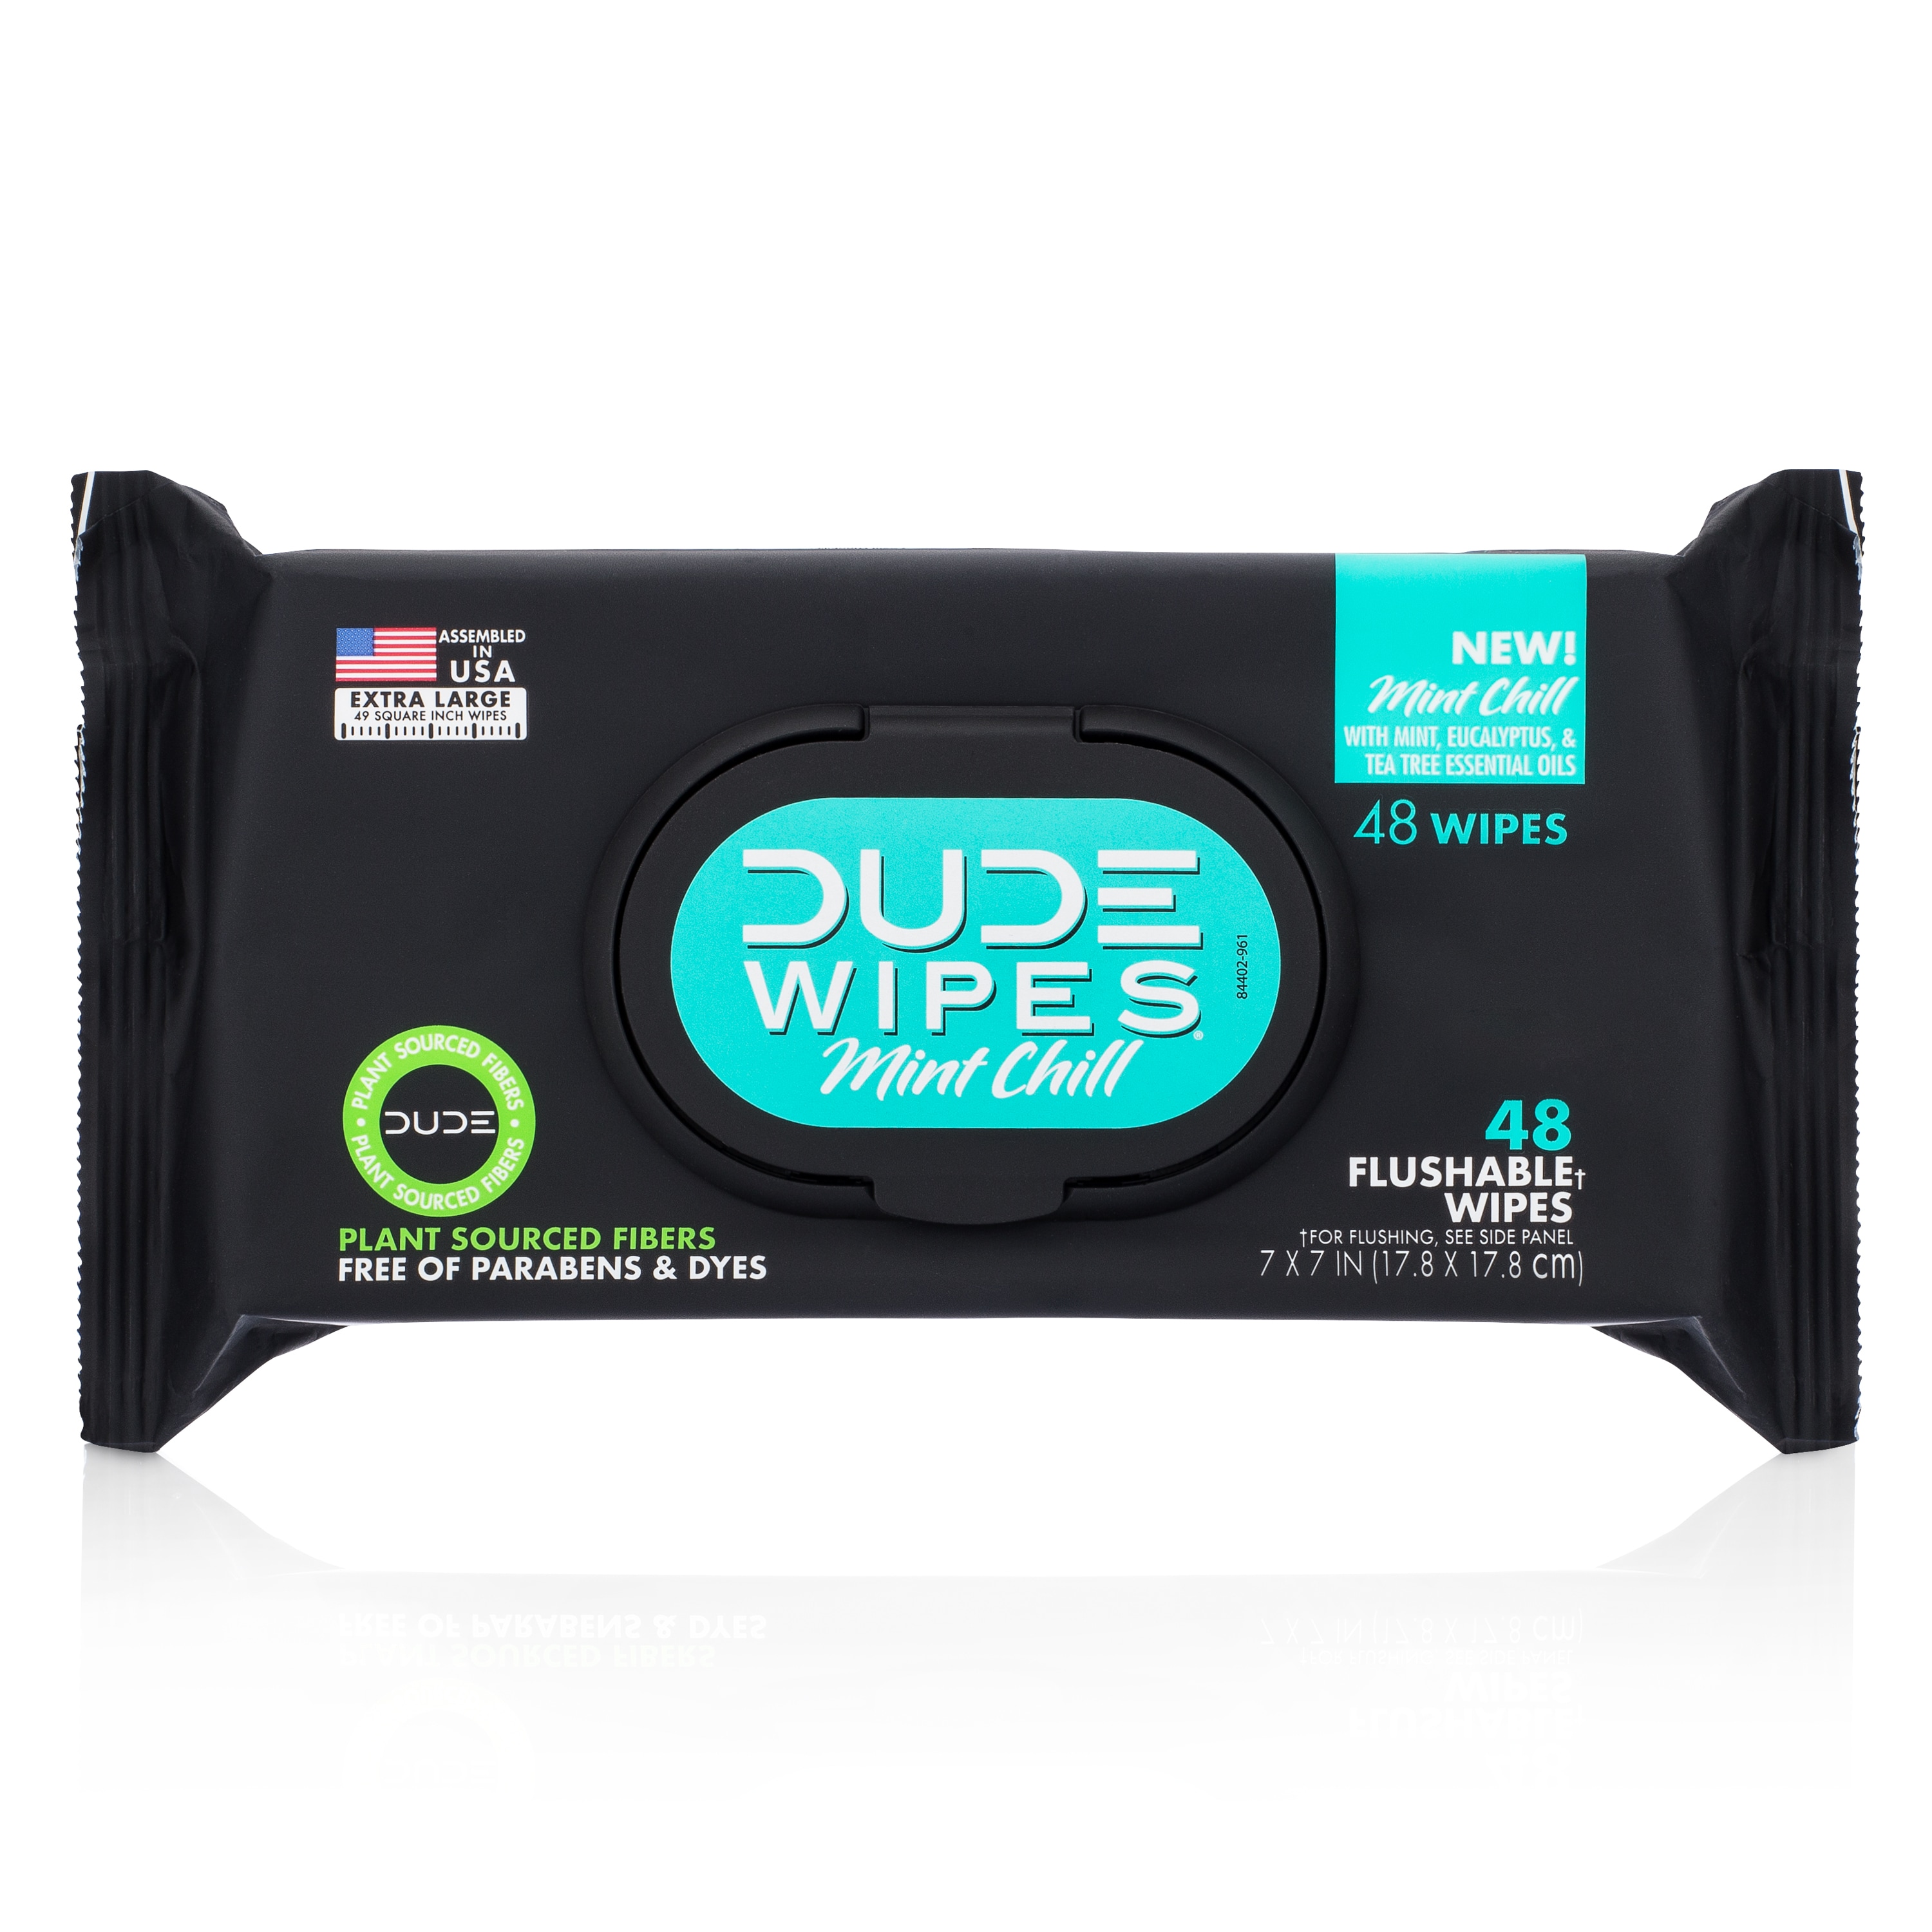 Dude Wipes Flushable Wipes, Fragrance Free, On-The-Go - 30 wipes